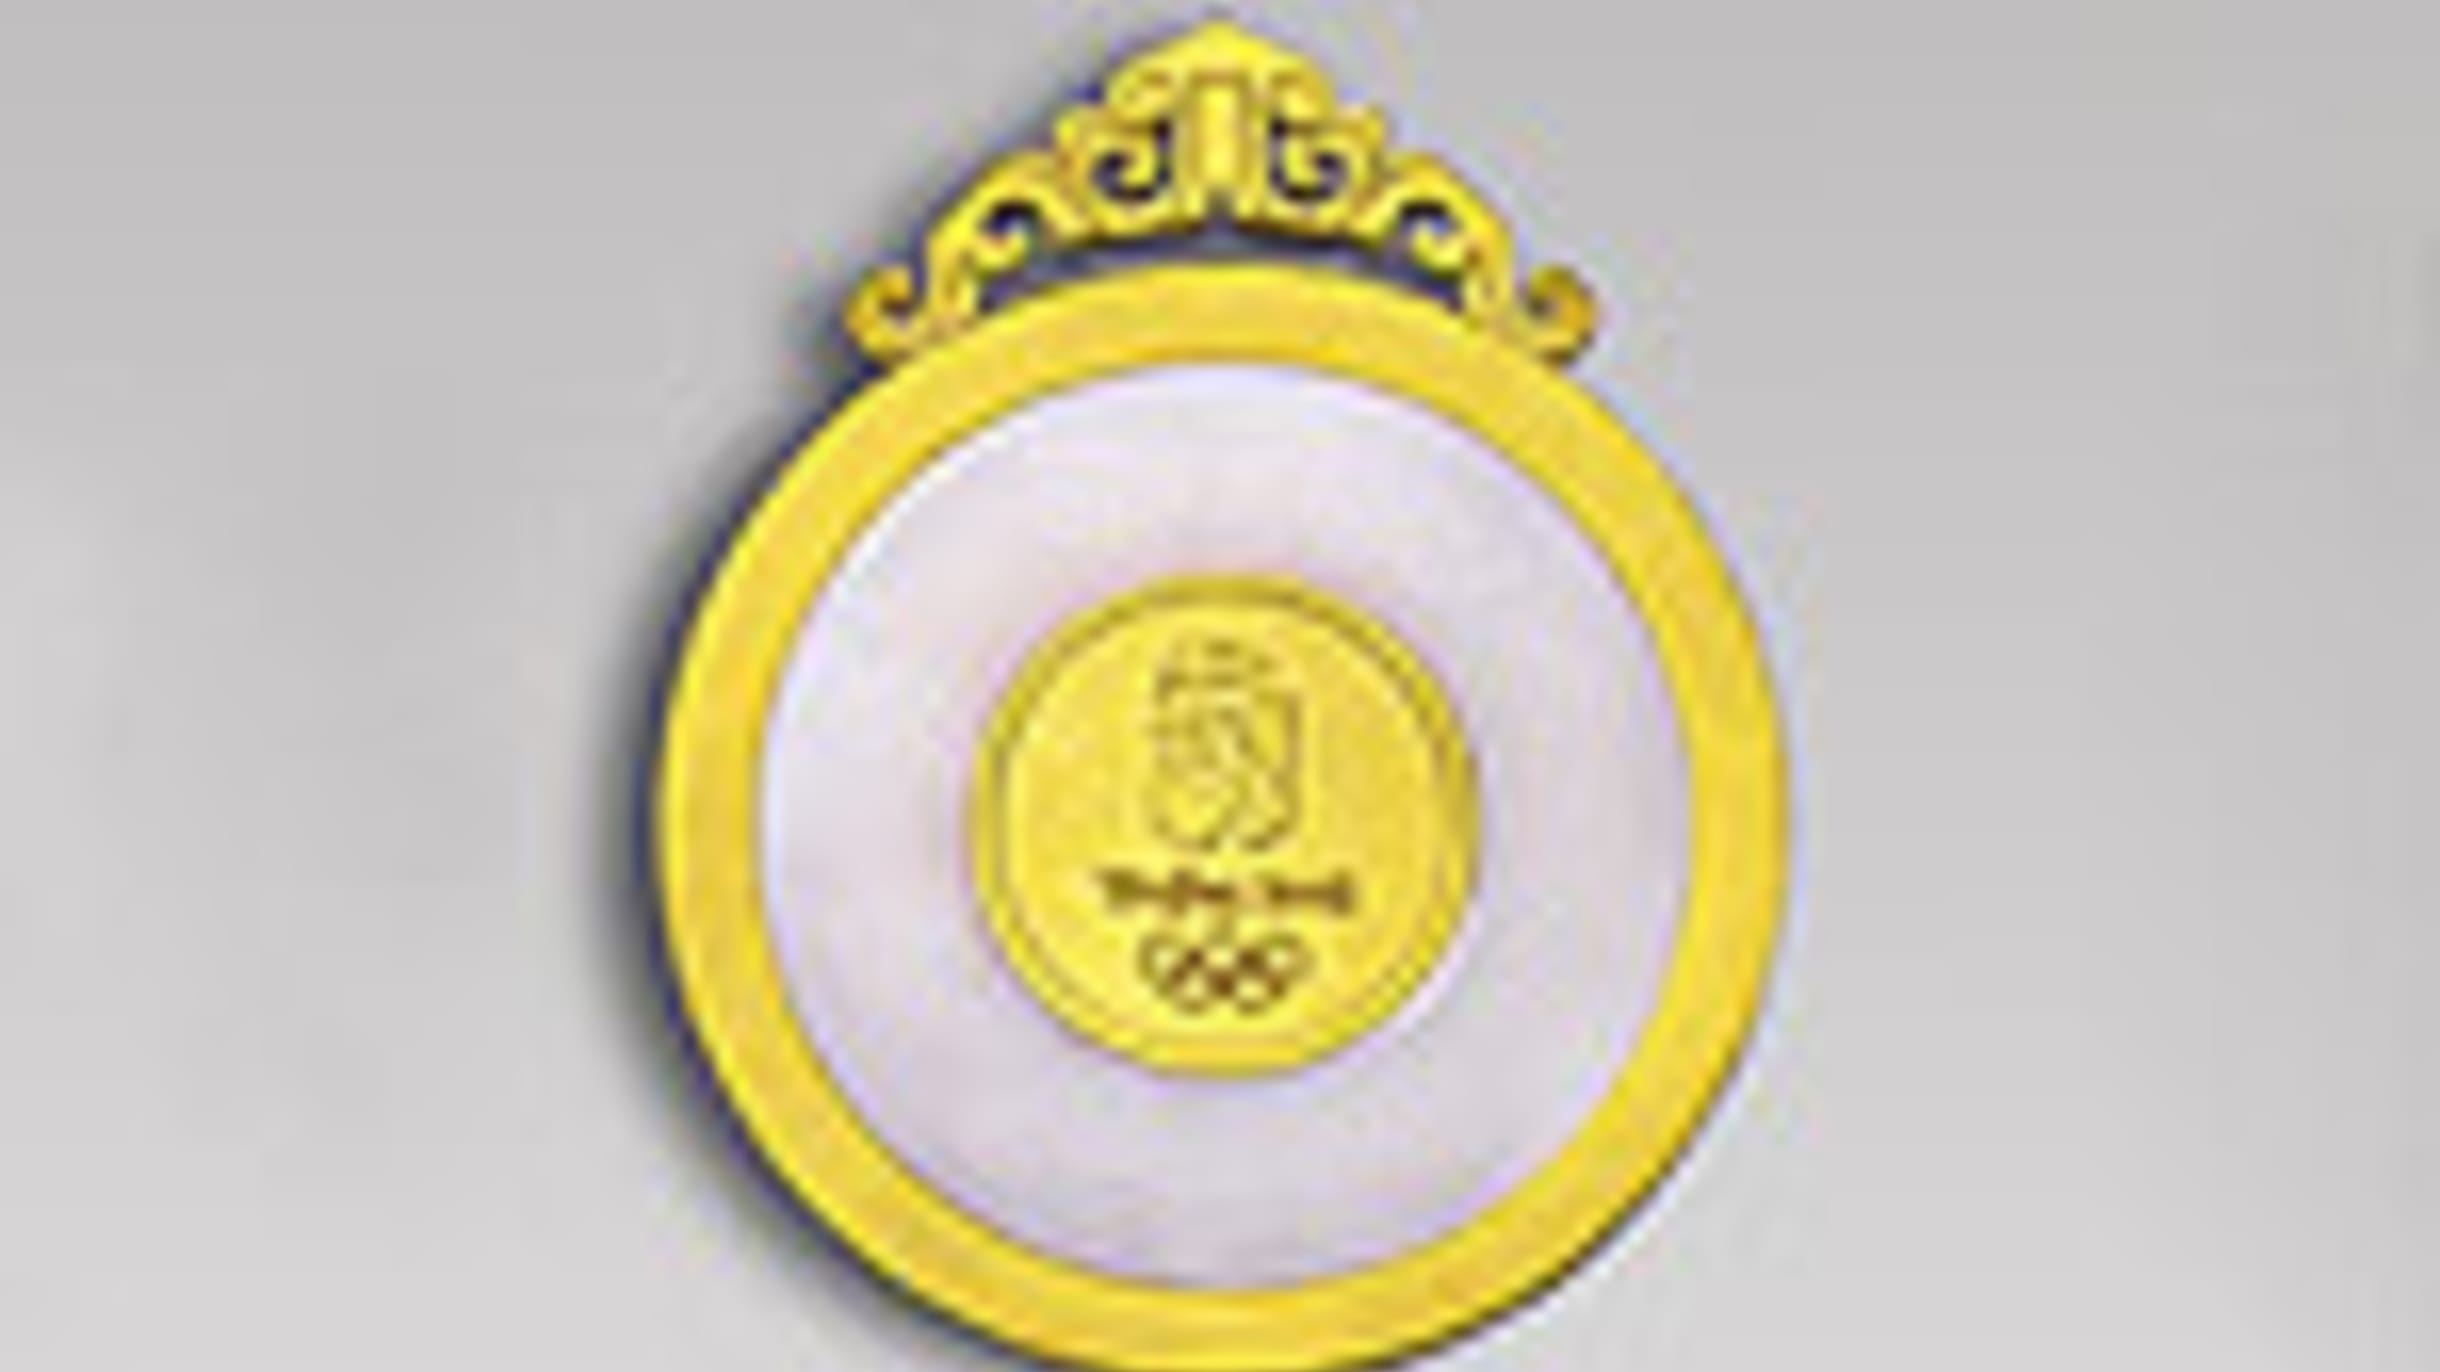 olympic medals 2008